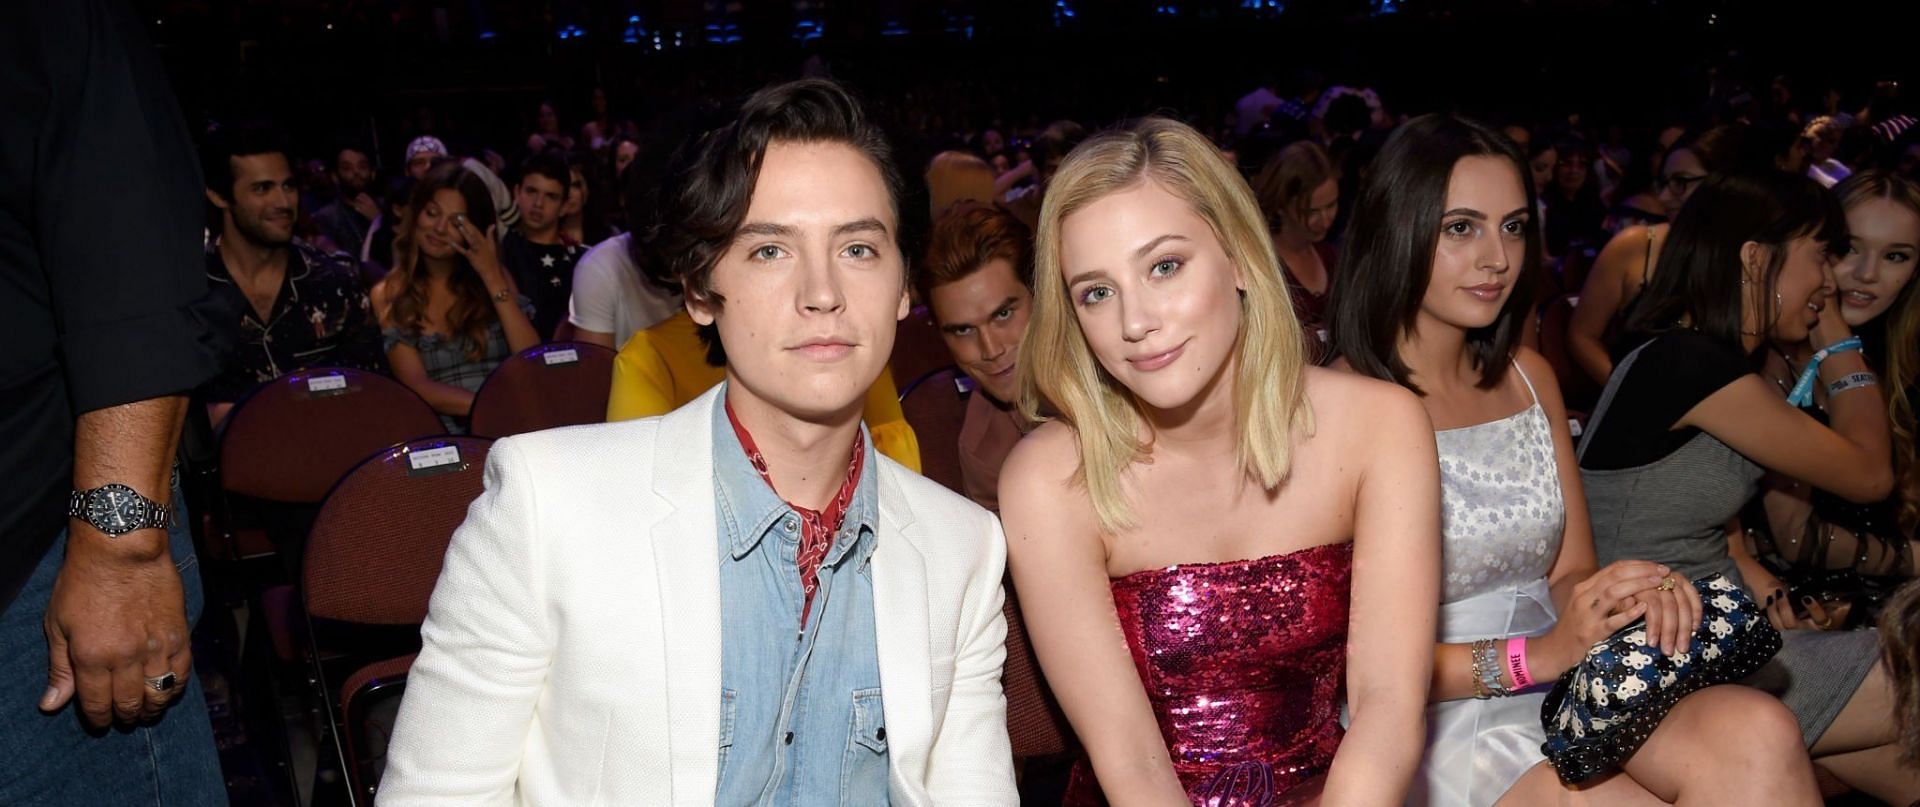 Cole Sprouse said he and Lili Reinhart &quot;did a lot of damage to each other&quot; during their relationship (Image via Getty Images)